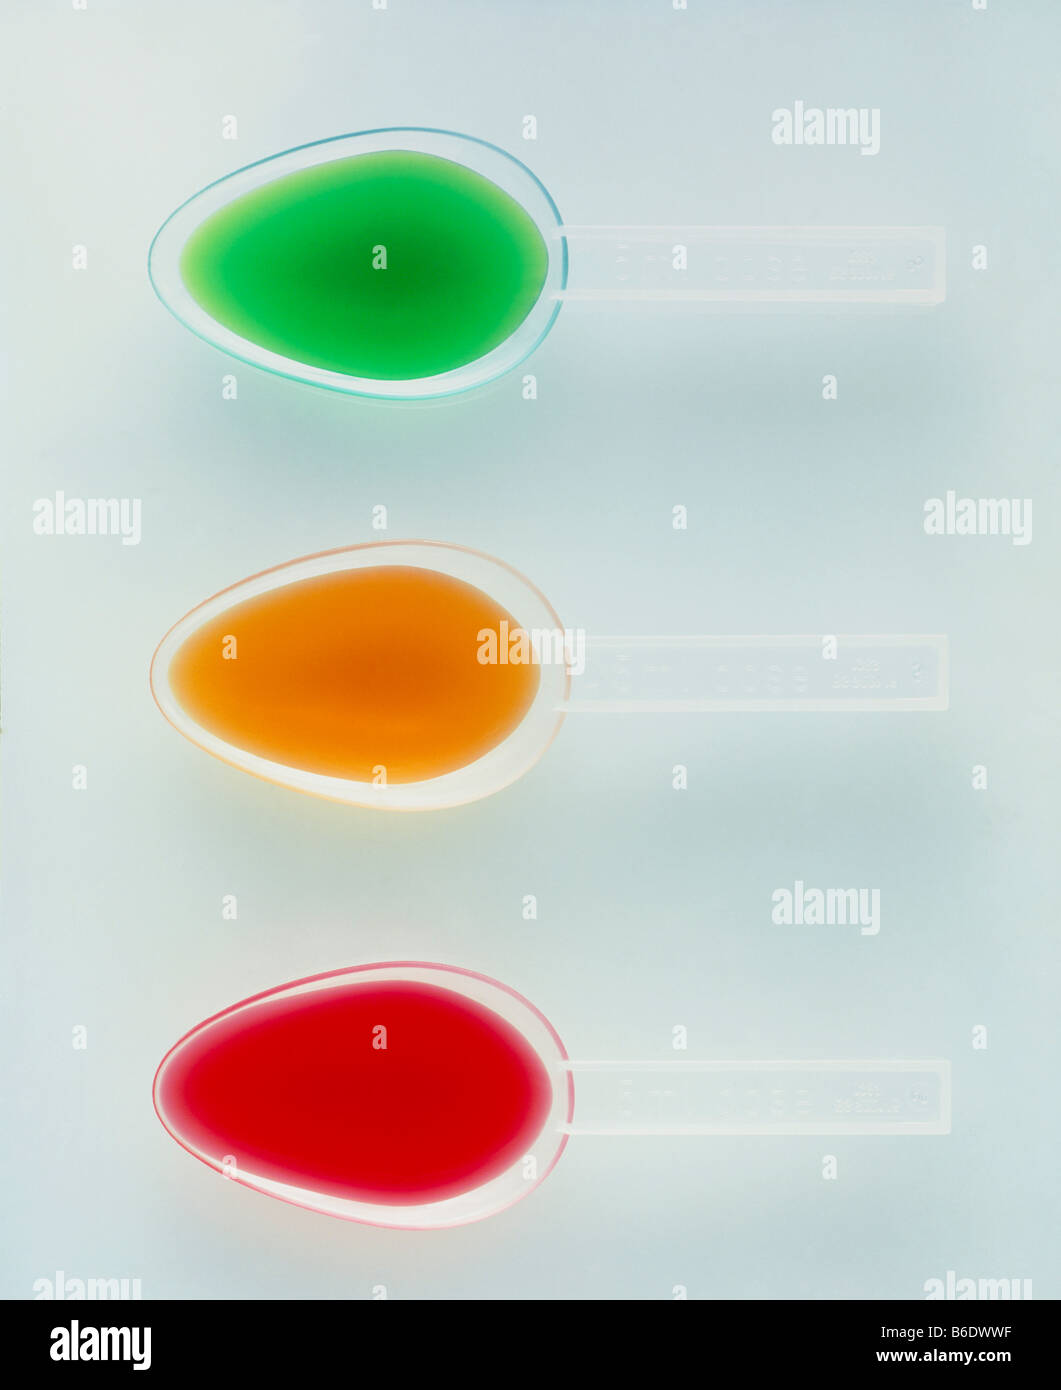 Spoonfuls of medicine. Coloured liquid medicines in three 5 millilitre spoons which help to measure the correct dose. Stock Photo